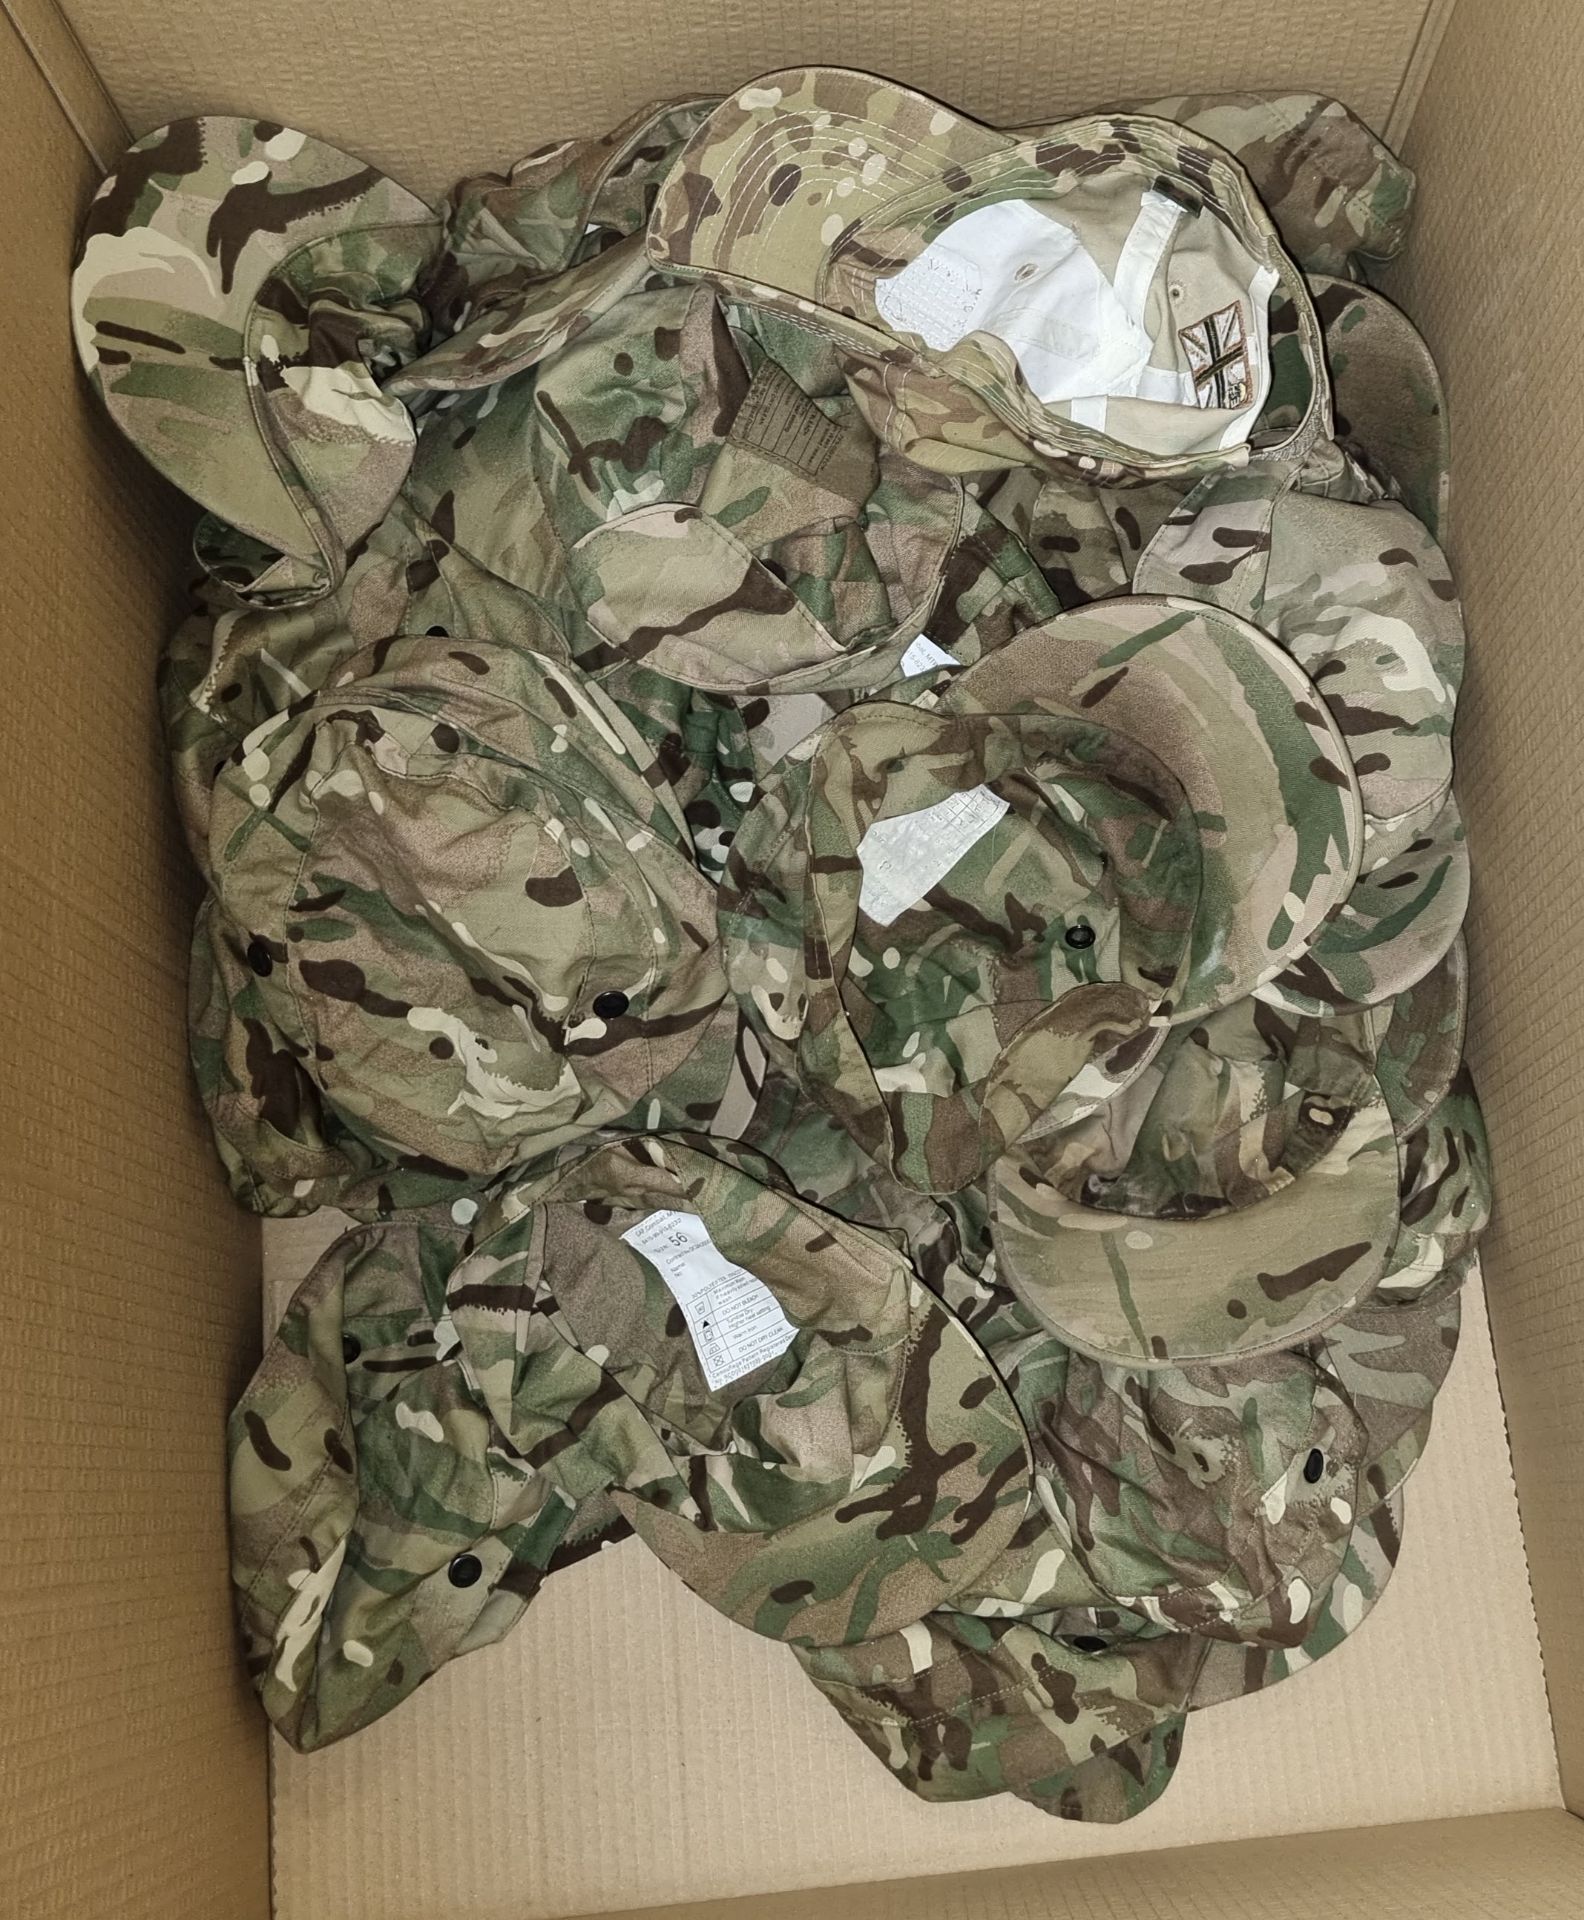 52x British Army MTP combat caps - mixed grades and sizes - Image 3 of 3